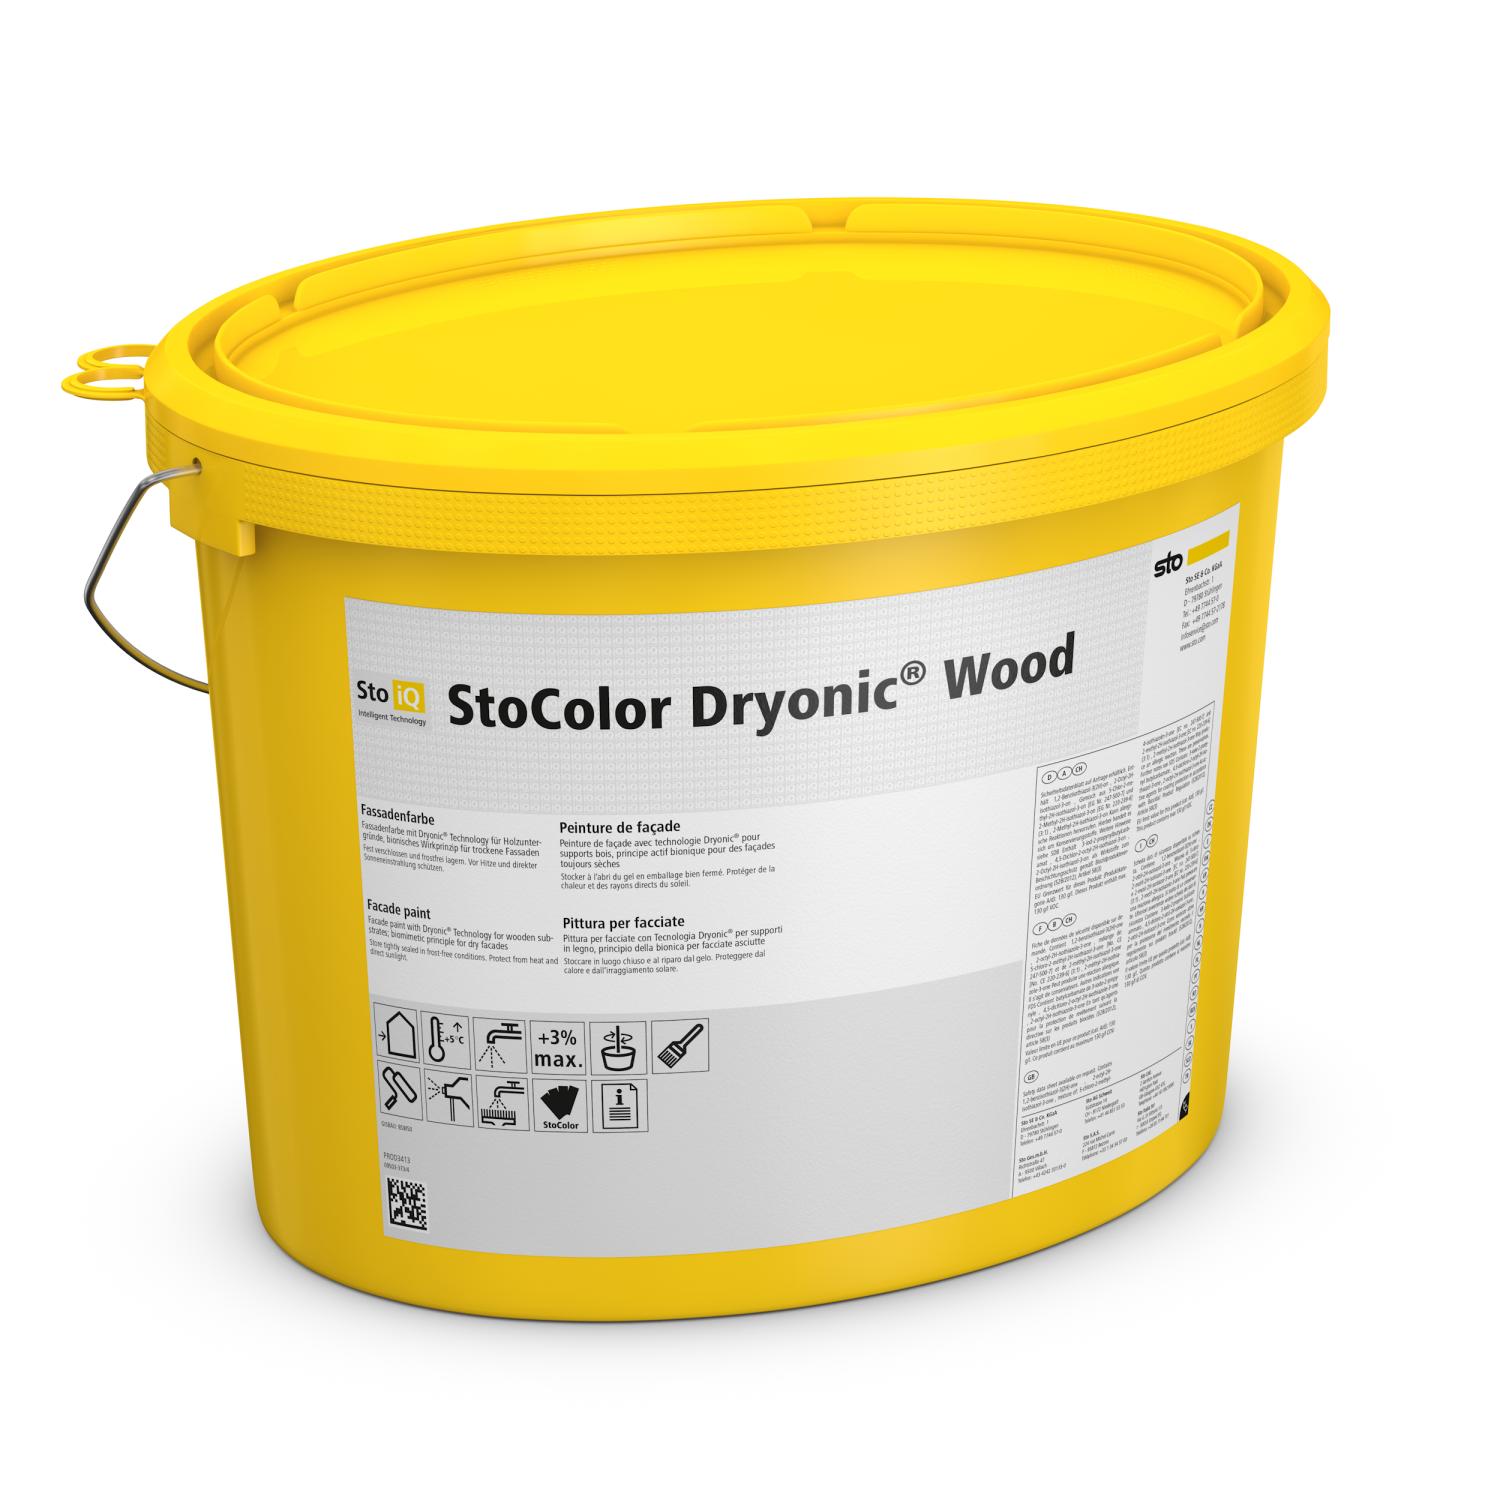 StoColor Dryonic Wood weiß - 5 l Eimer